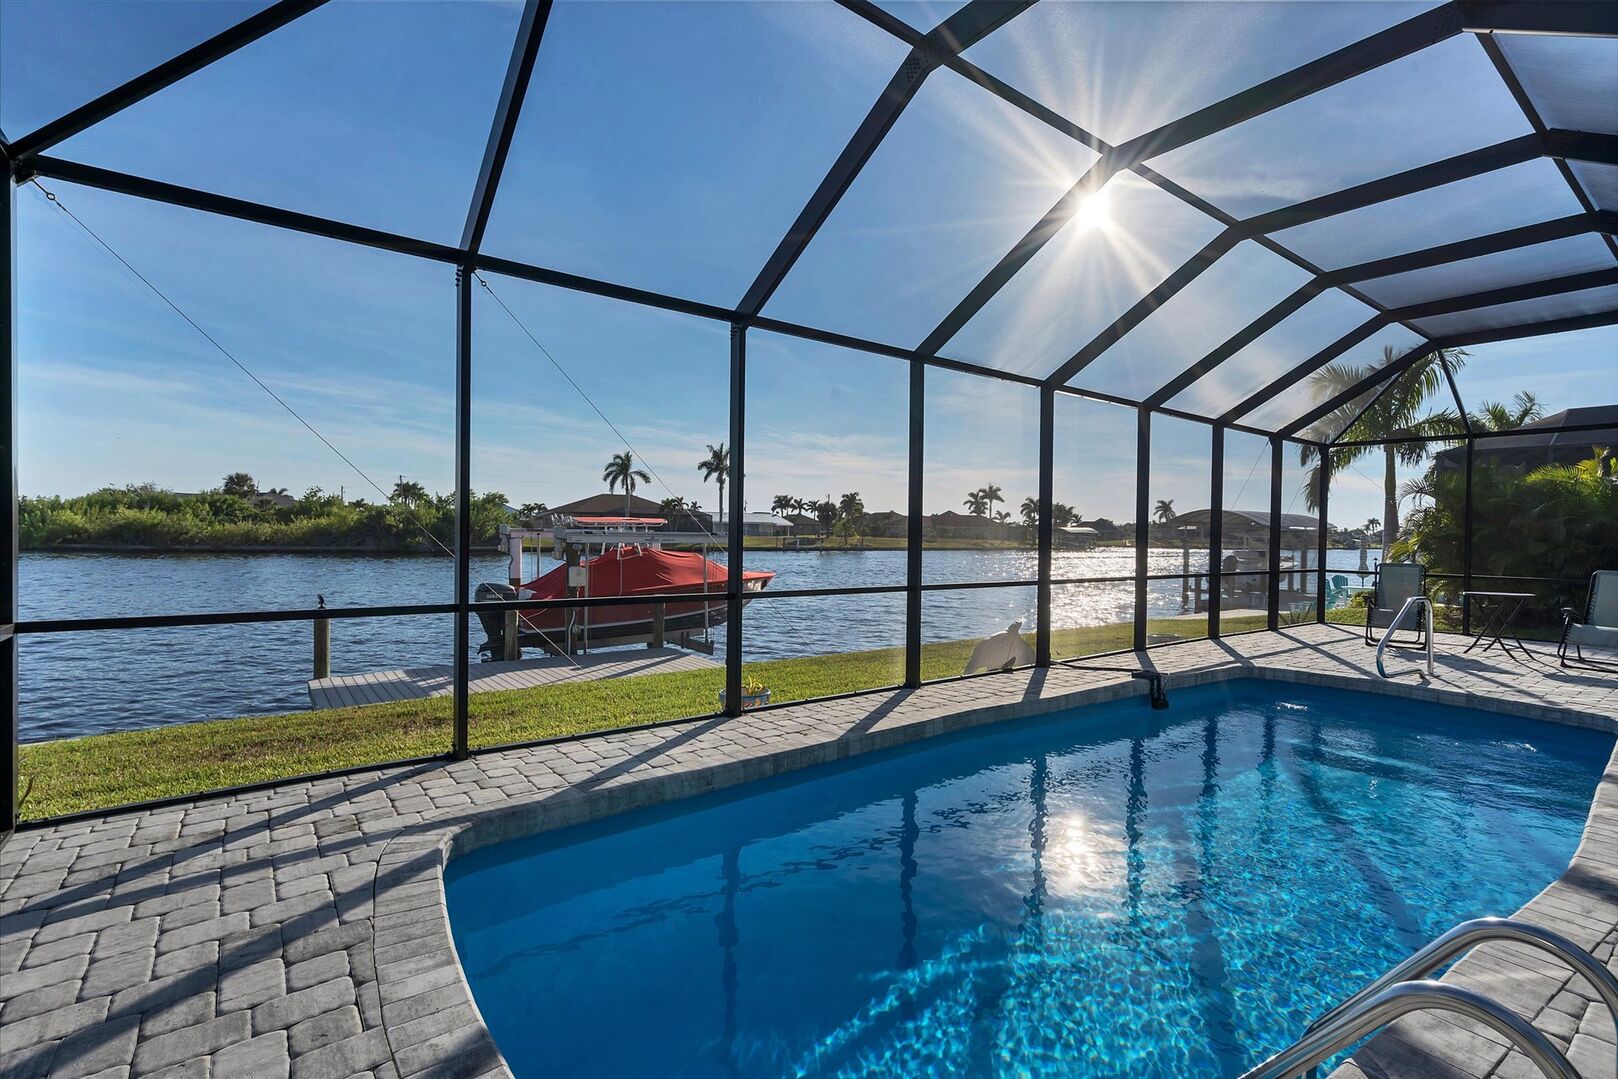 Lovely South Gulf home with sparling pool overlooking canal